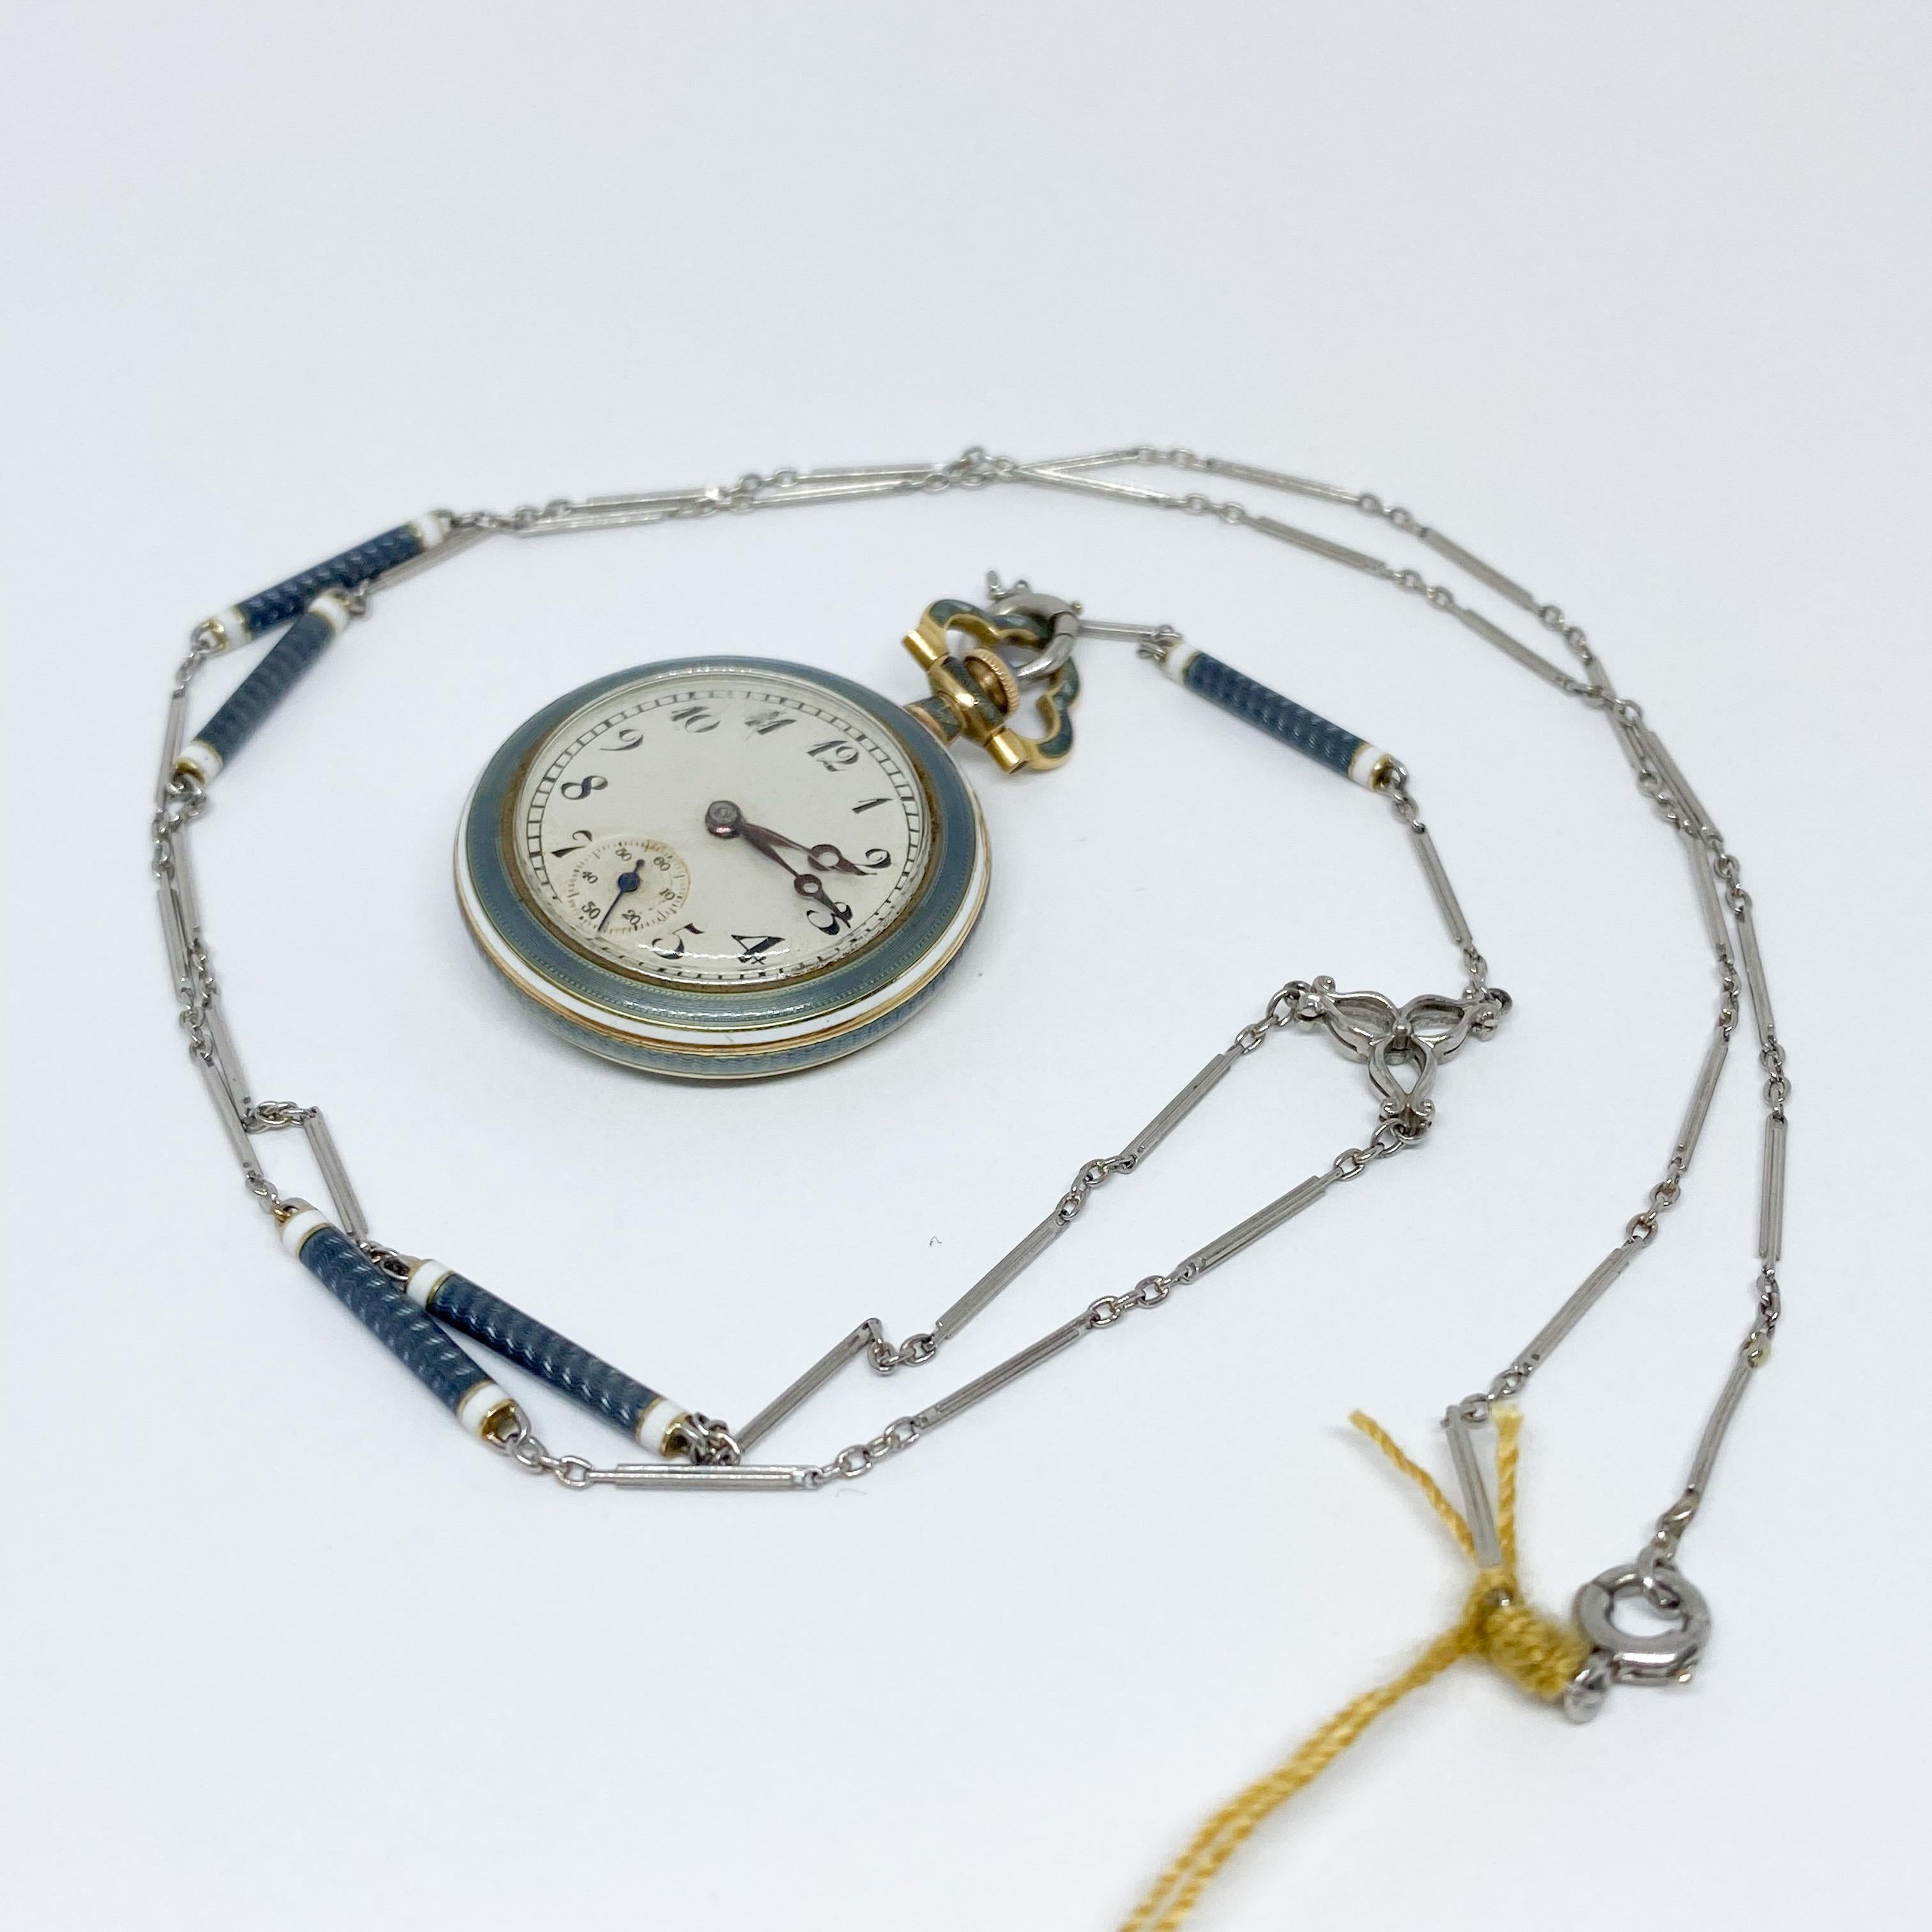 Edwardian vintage watch pendant in original condition! Designed in 14K yellow gold and Platinum with blue enamel. The necklace with chain and watch measures 21